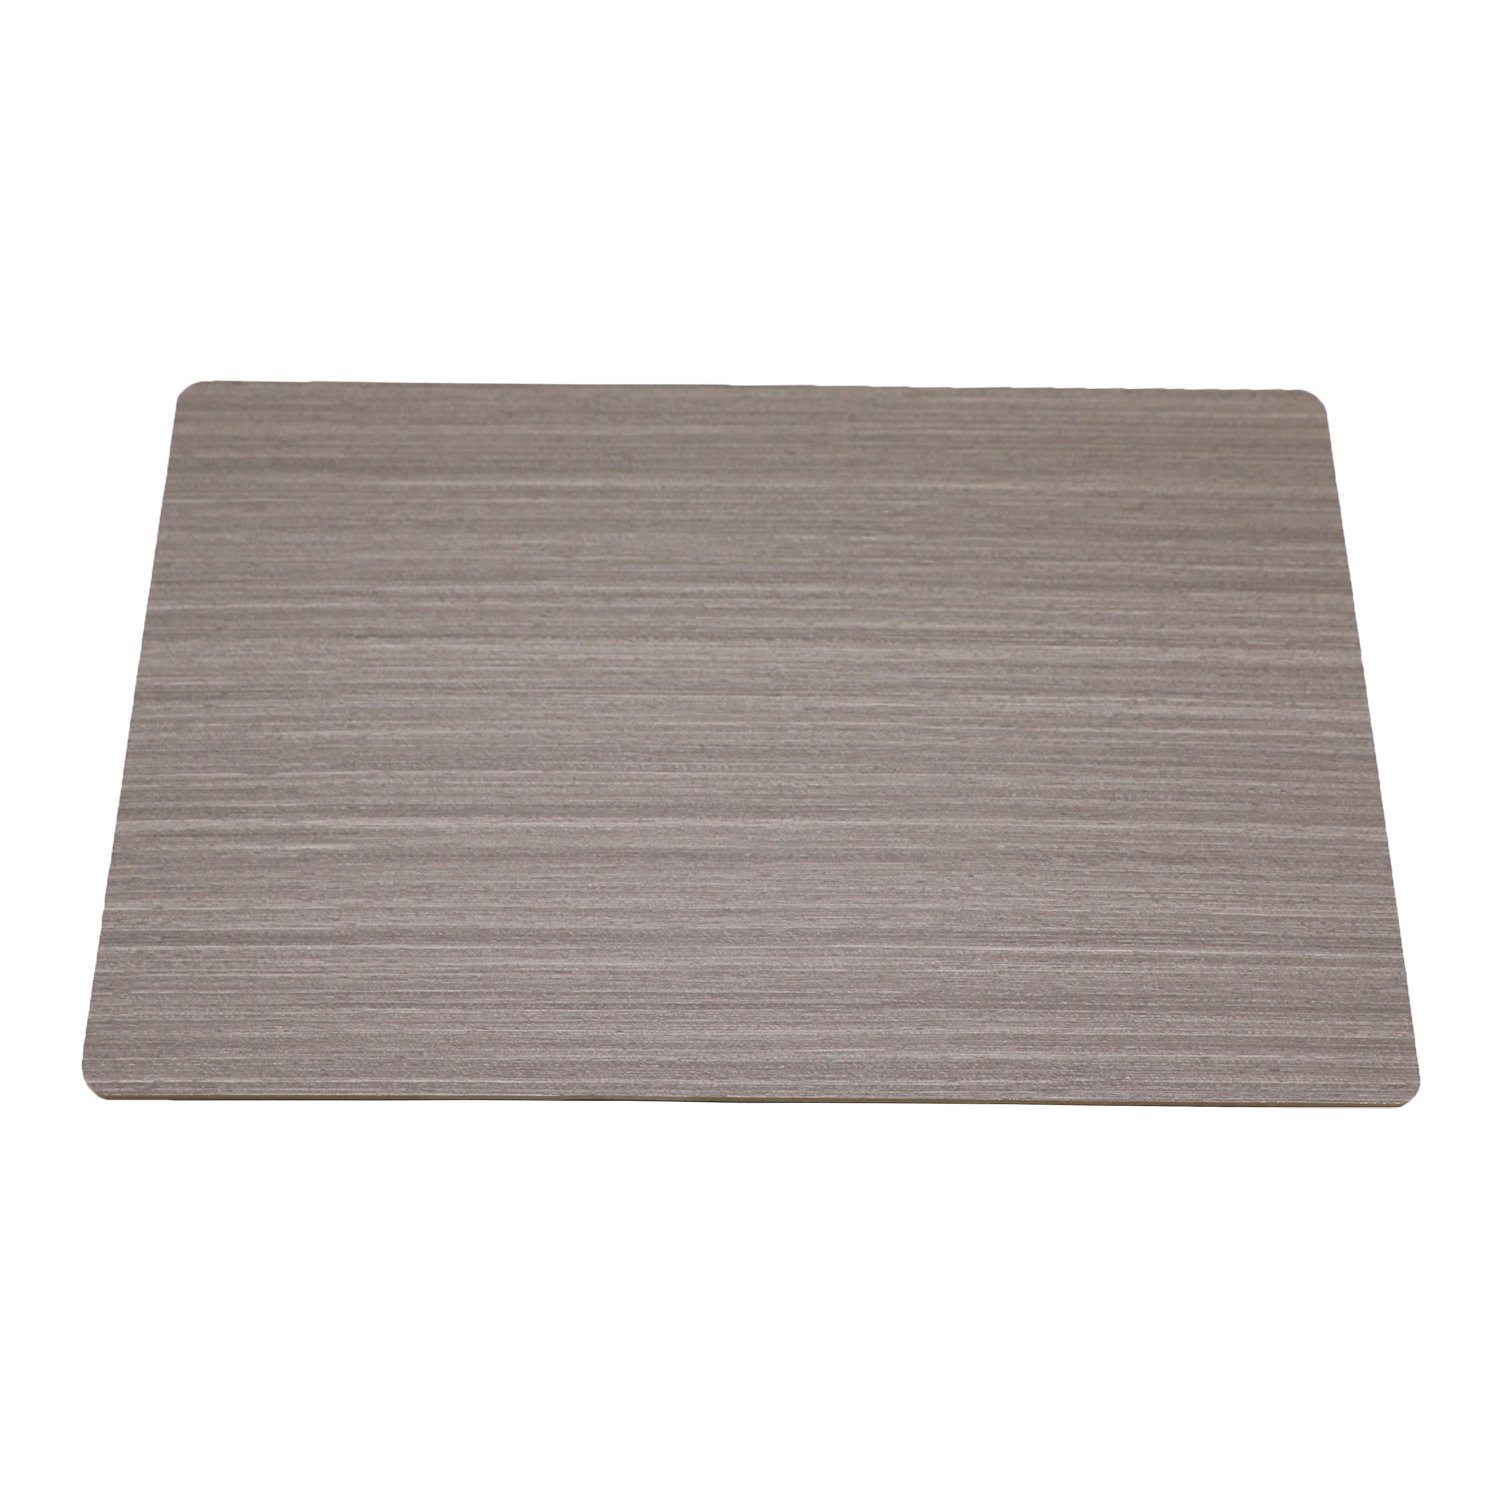 Factory Supply Raw Plain Texture Melamine Faced MDF with Cheap Price for Furniture Decorative